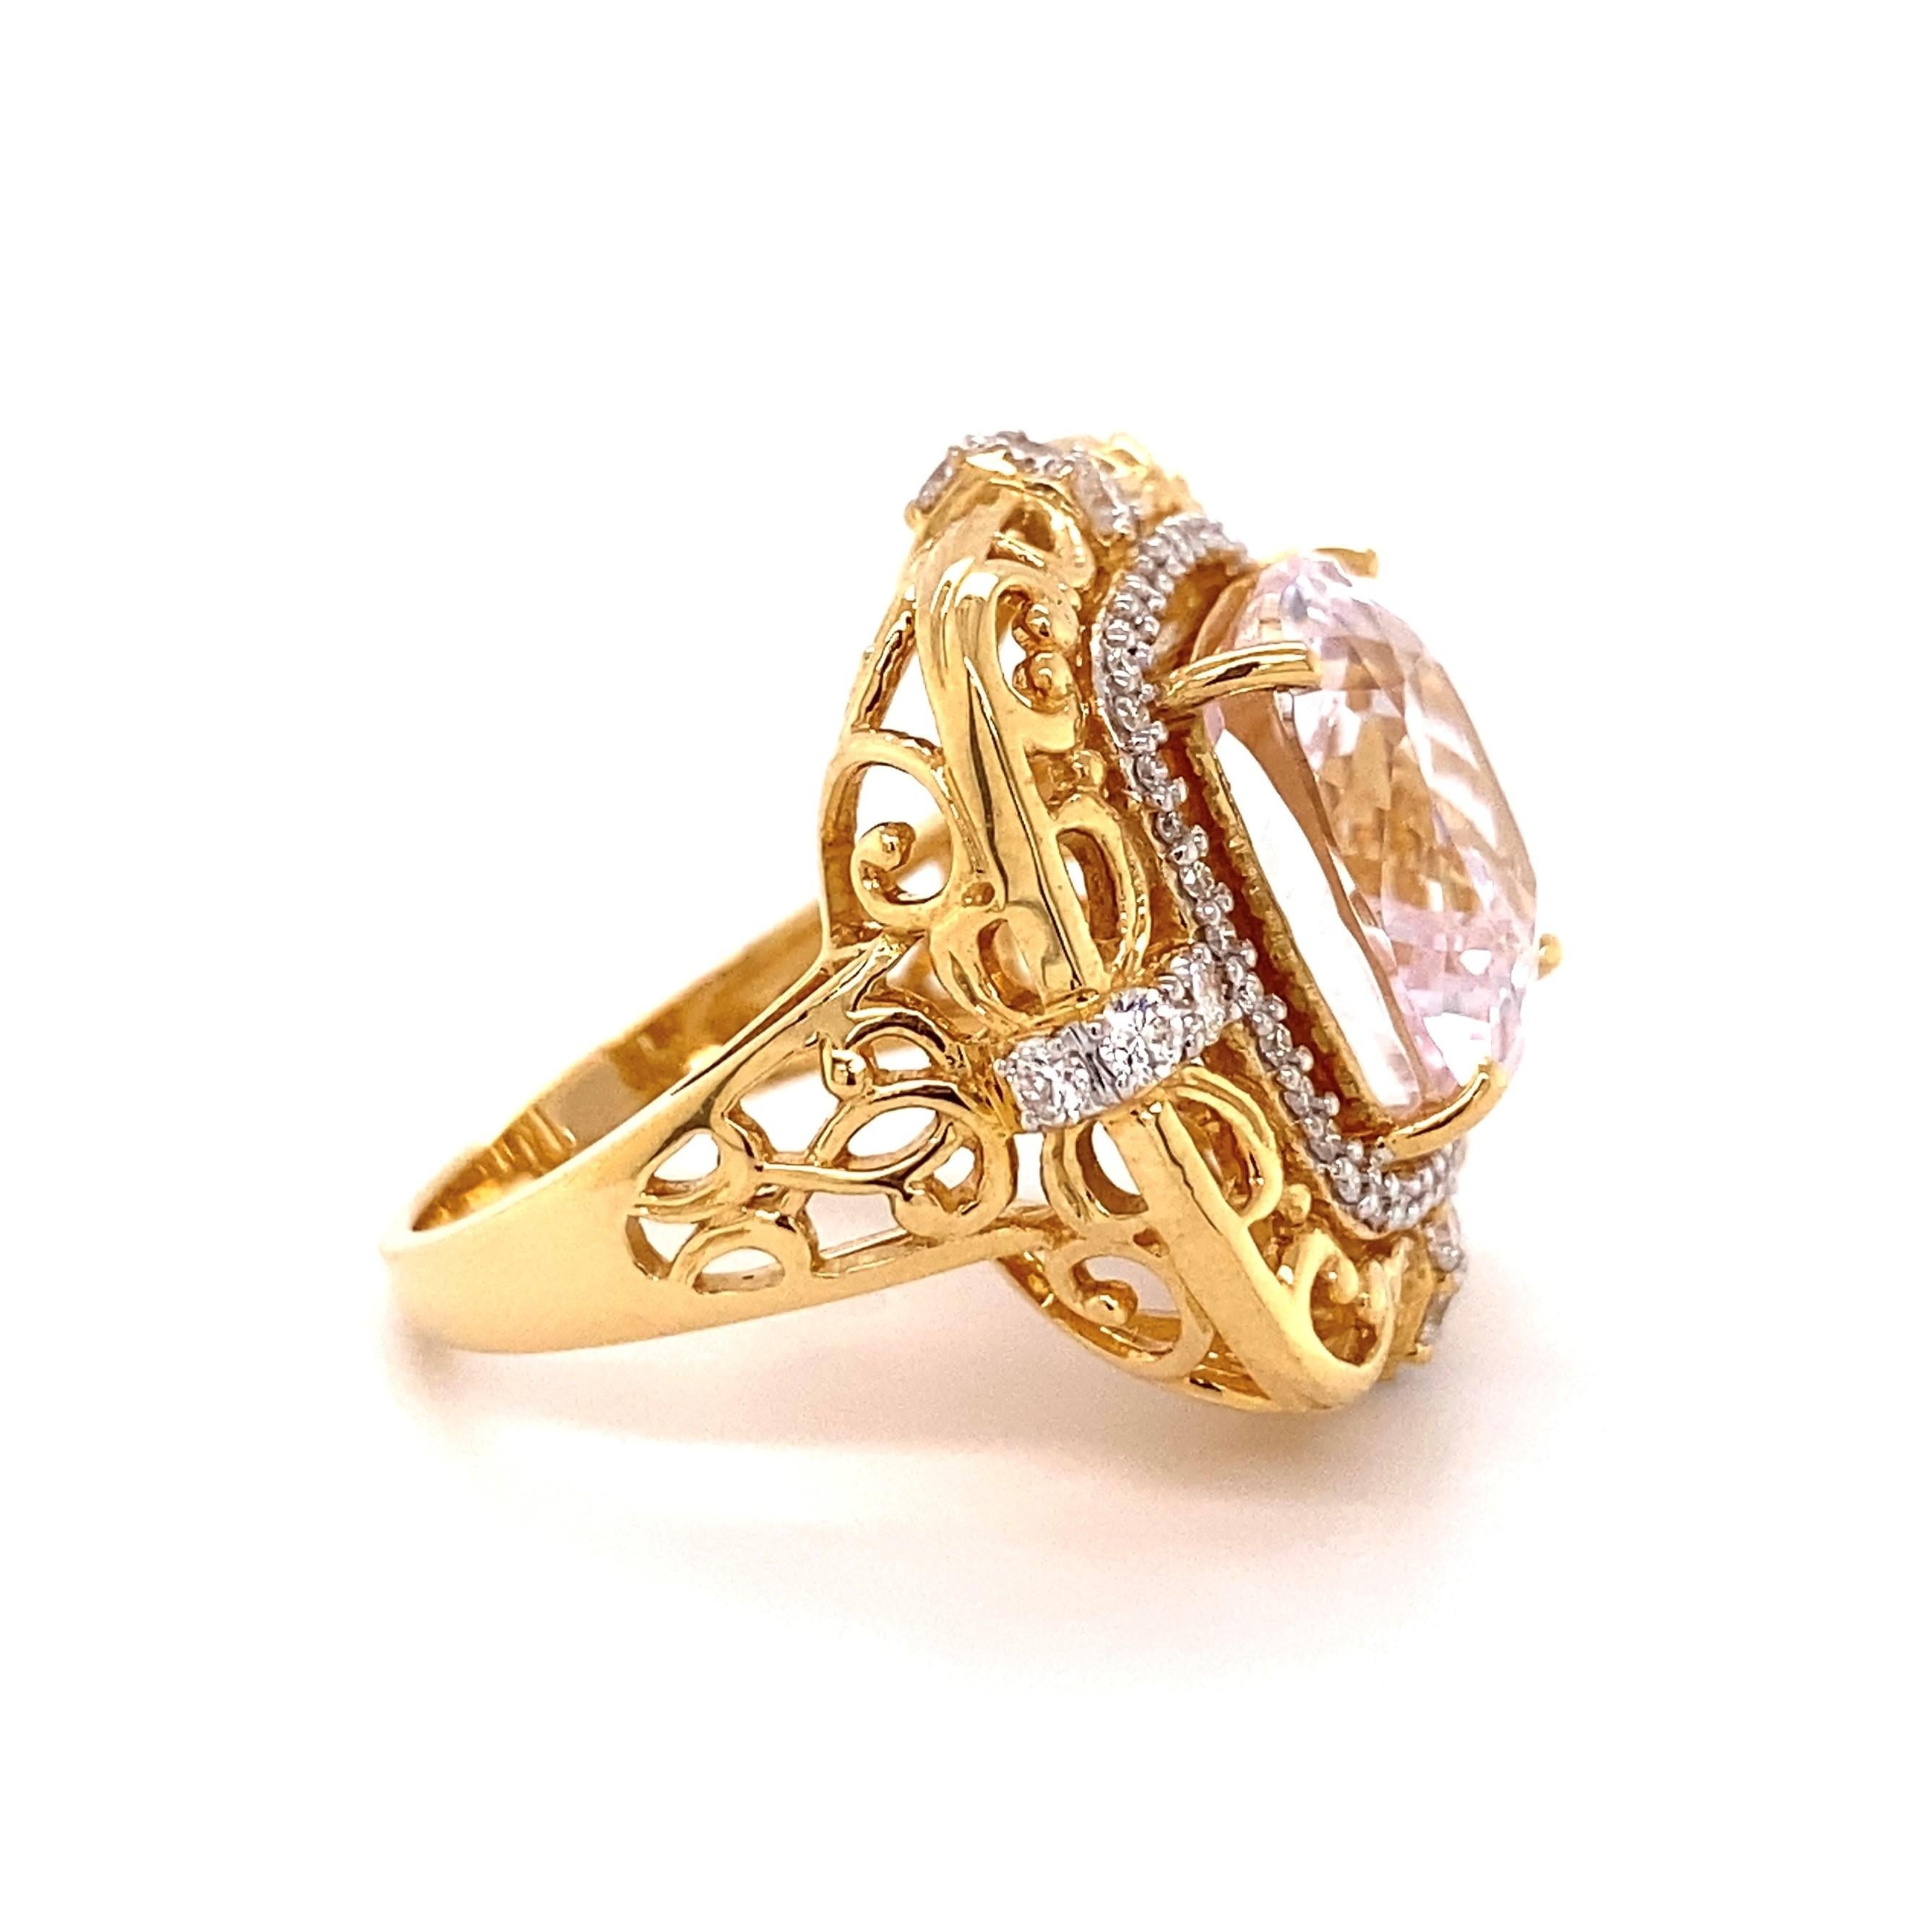 Awesome Kunzite and Diamond Cocktail Ring, securely centered by an 11.17 Carat Cushion Kunzite, surrounded and accented by Diamonds, approx. 0.58tcw. Beautifully ‘wrapped’ Hand crafted 18K Yellow Gold mounting. Approx. Dimensions: 1.13” l x 0.98” w